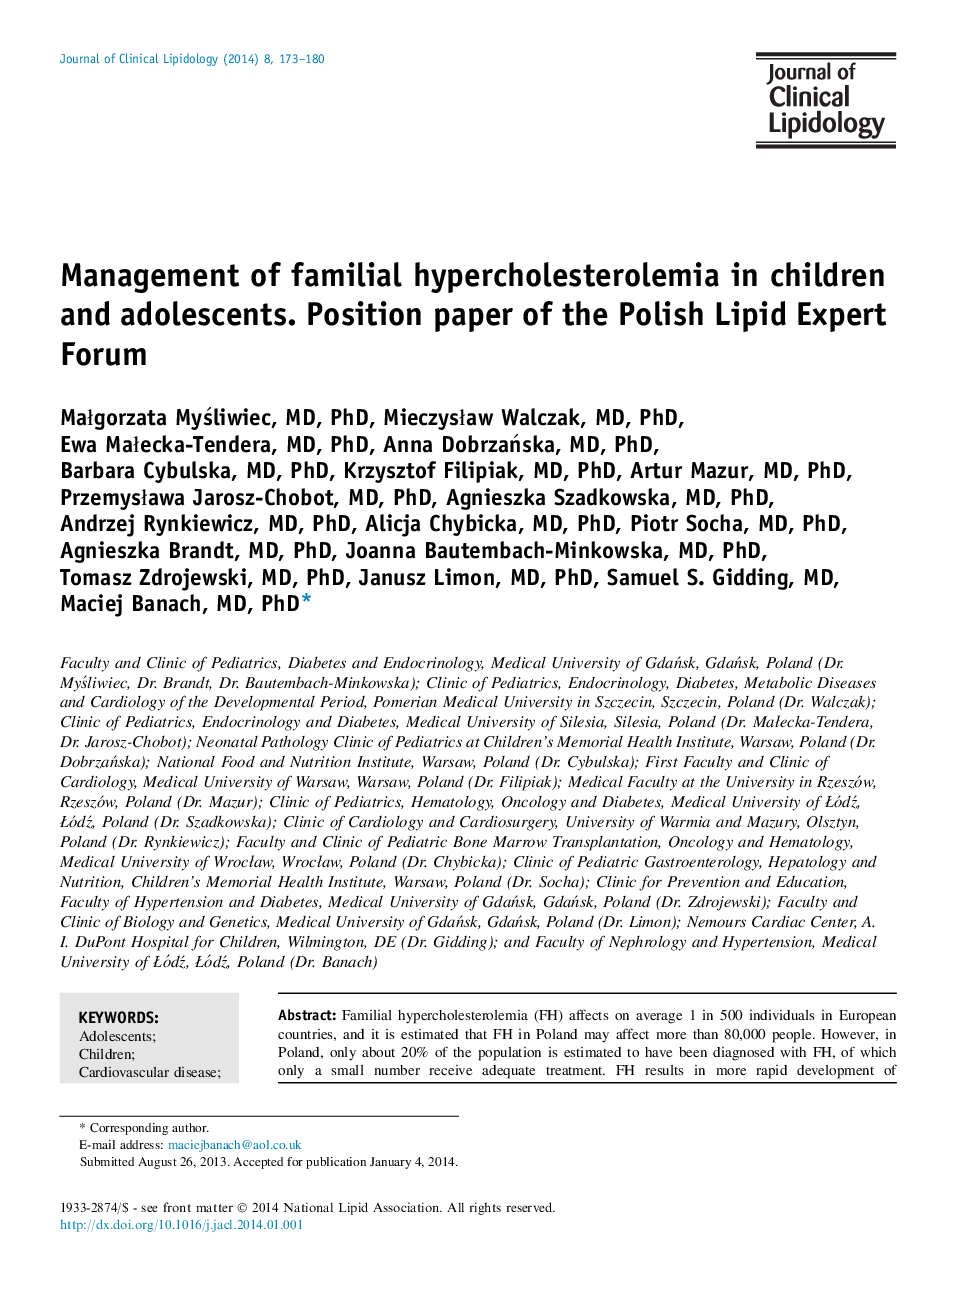 Management of familial hypercholesterolemia in children and adolescents. Position paper of the Polish Lipid Expert Forum